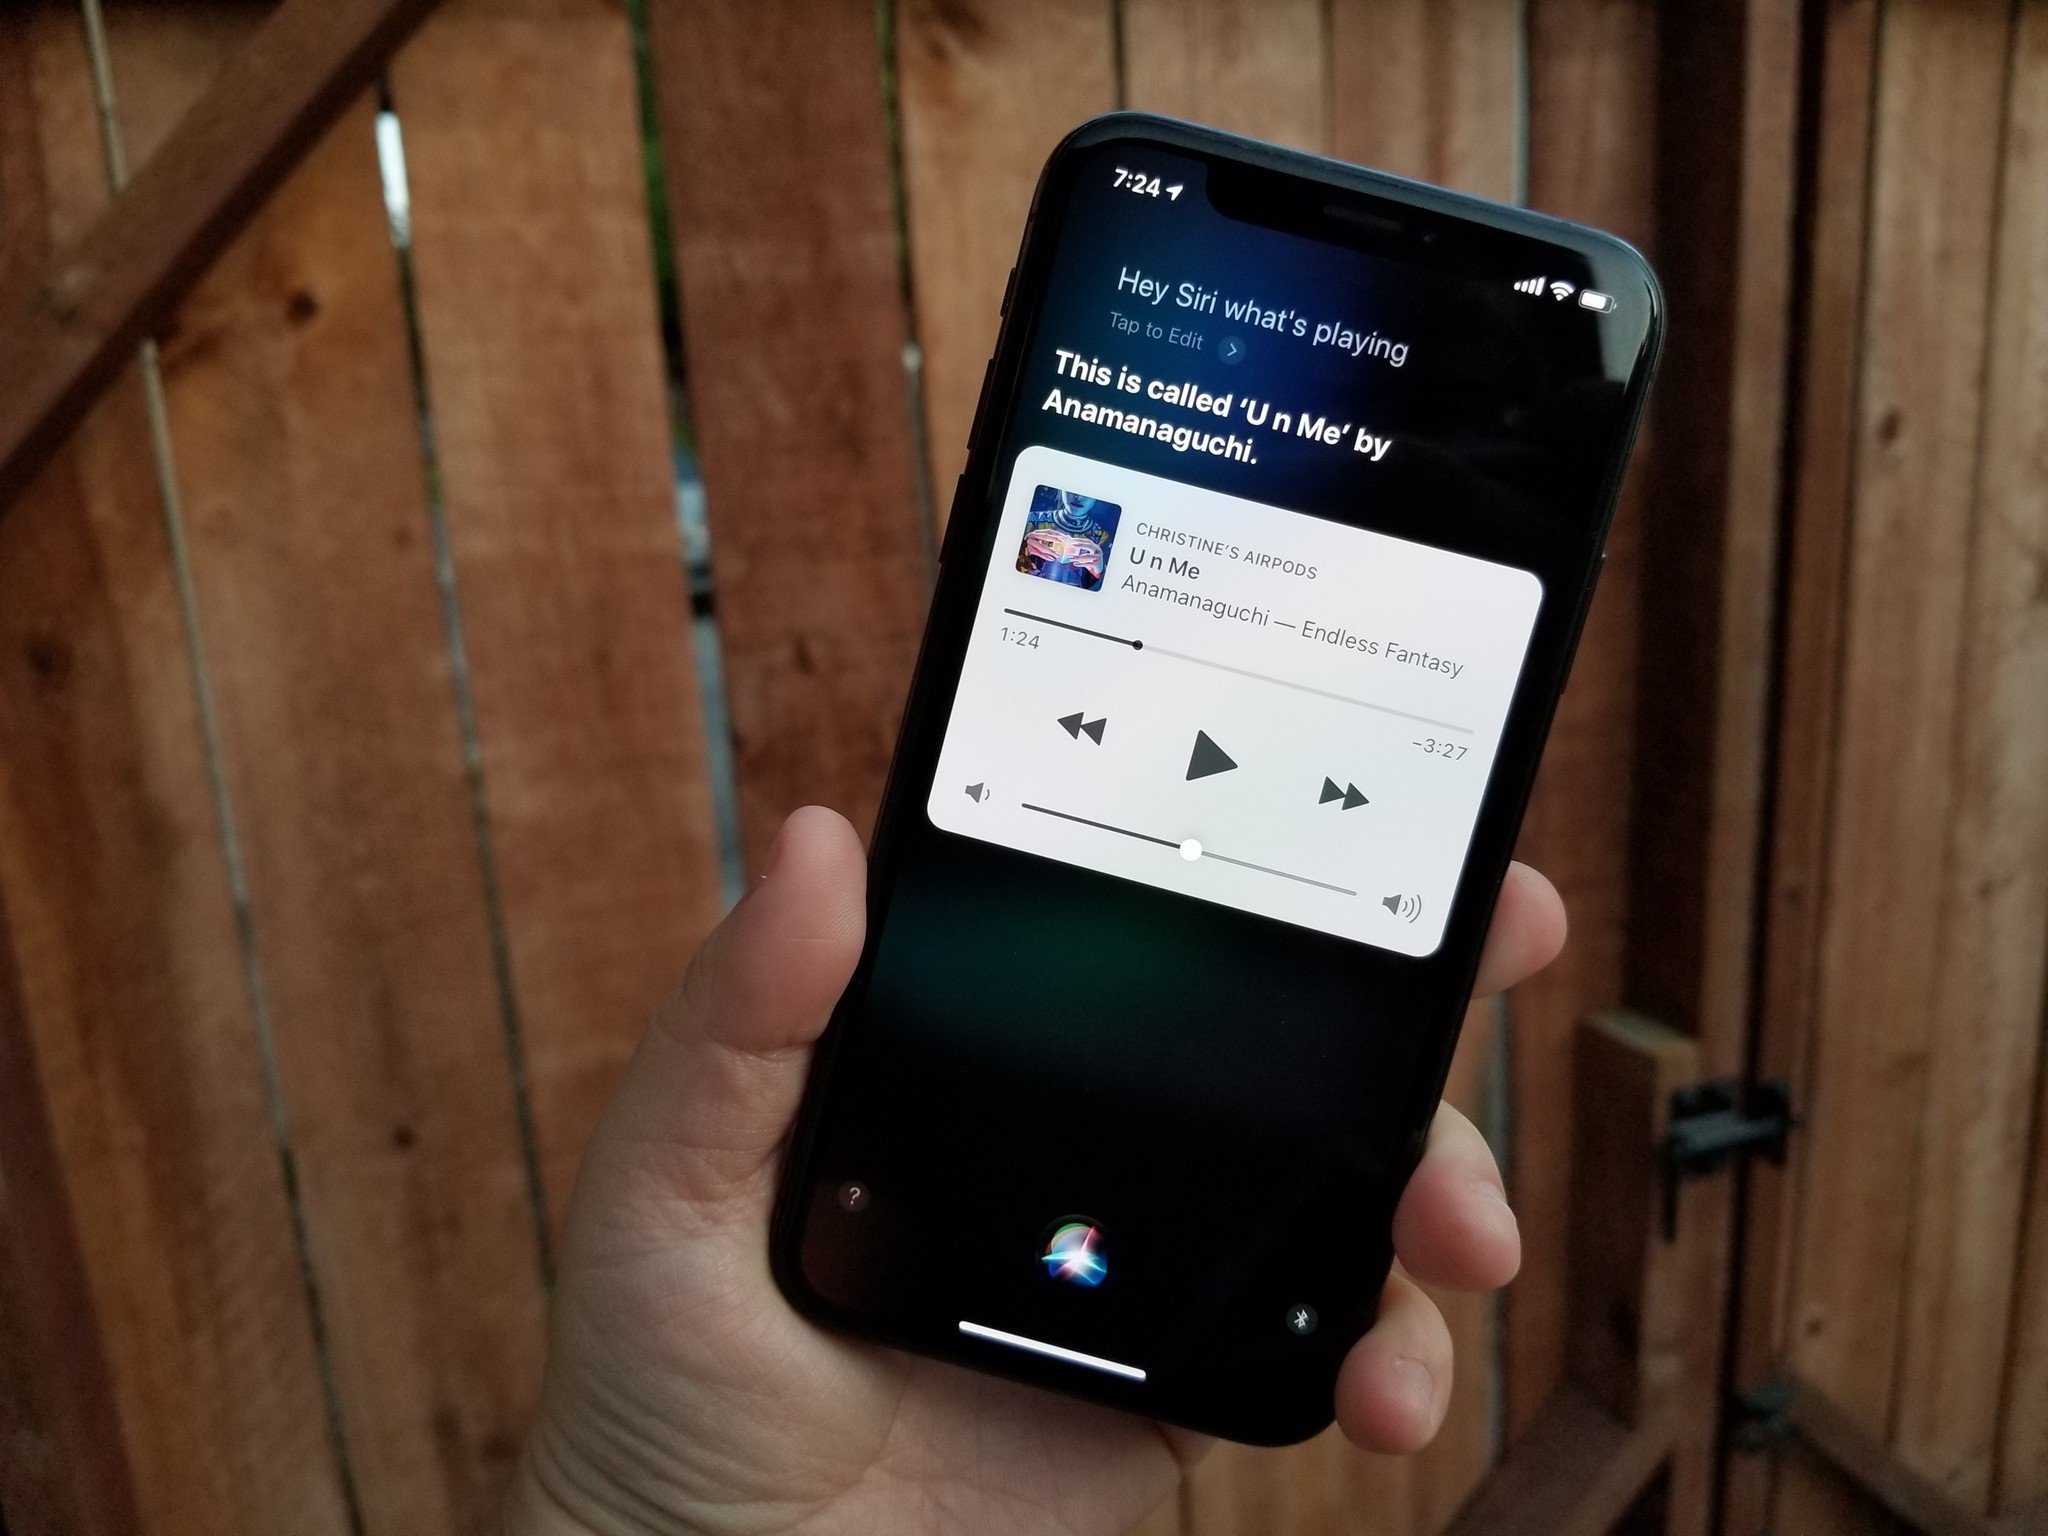 Mysterious Siri-enabled device hinted for 2021 release from Apple